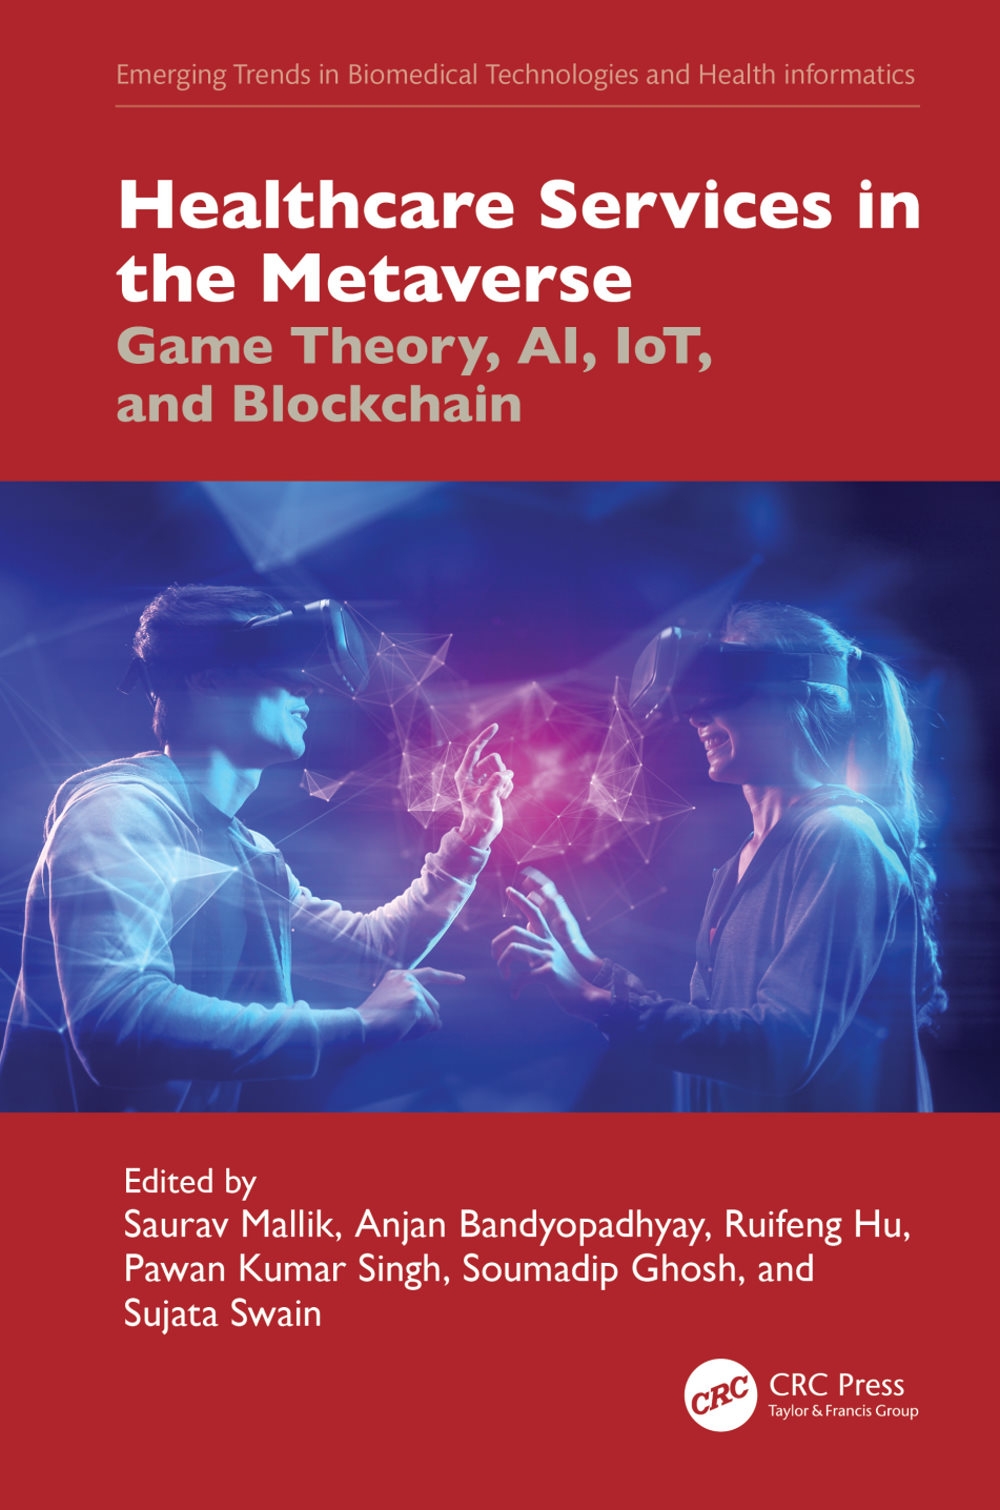 Healthcare Services in the Metaverse: Game Theory, Ai, Iot, and Blockchain